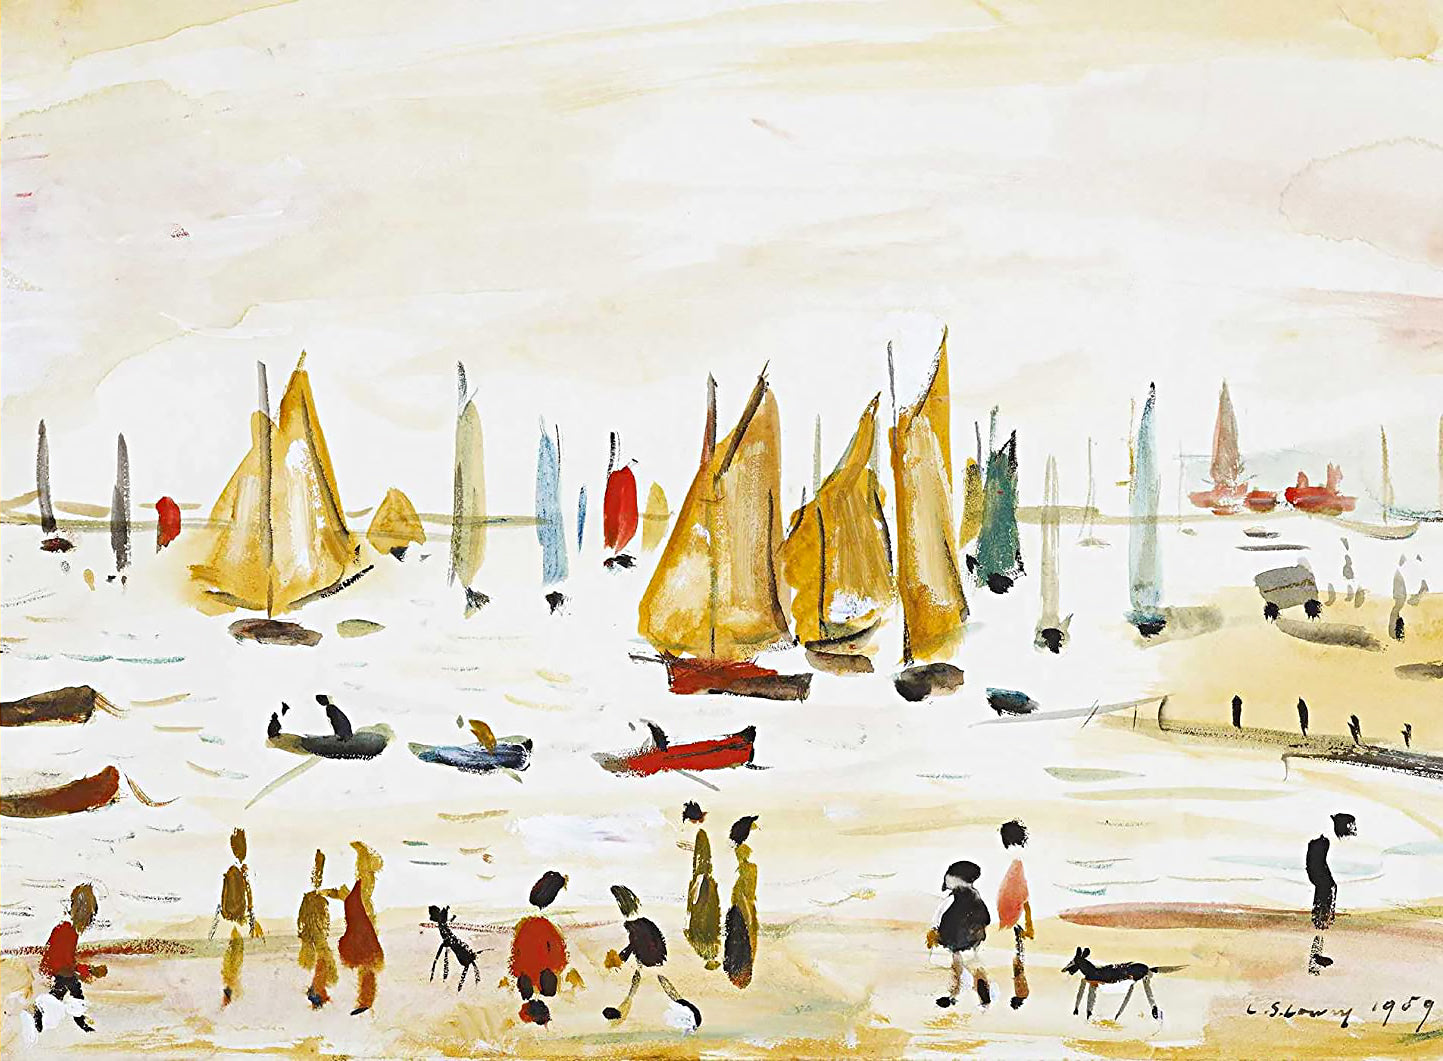 A famous fine art painting of L. S. Lowry Yachts, 1959.